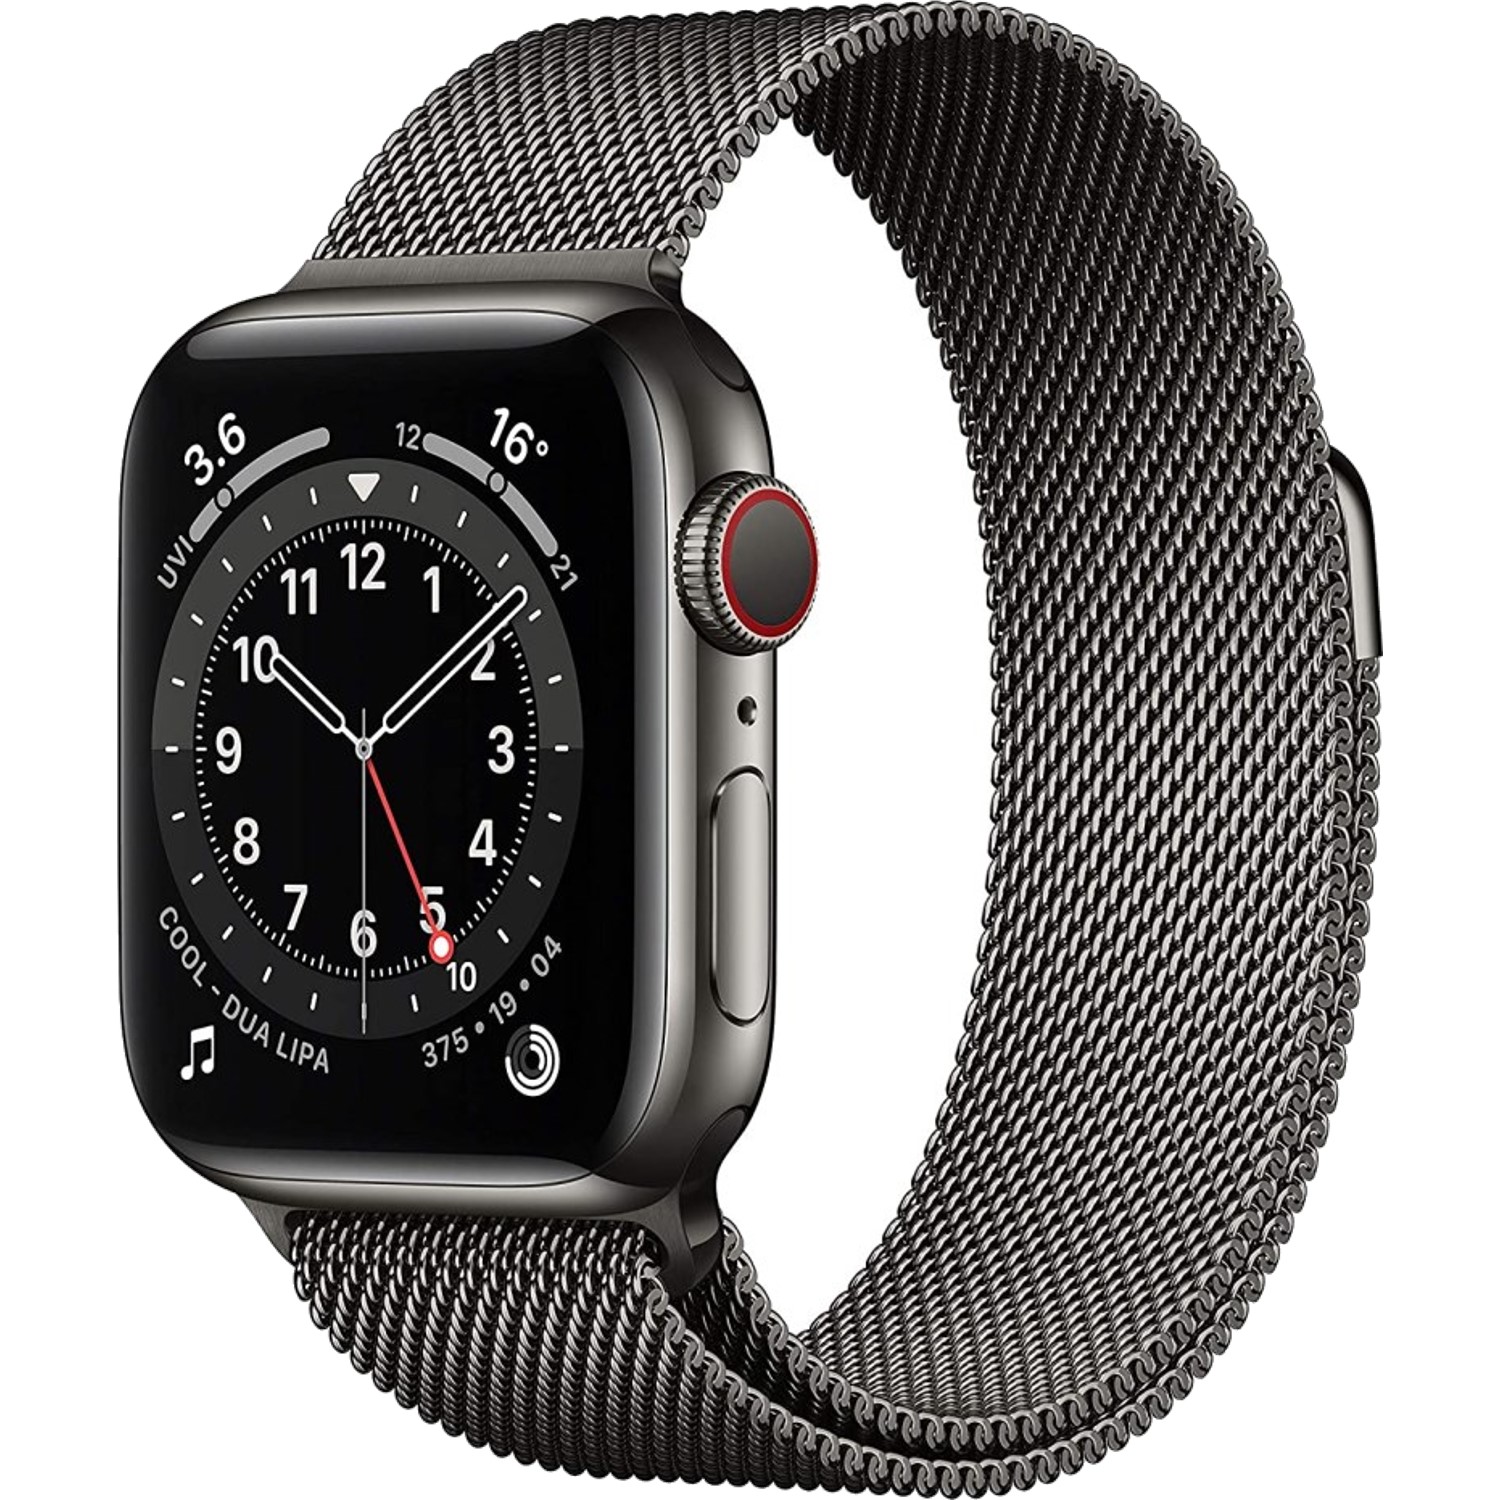 Apple Watch Series 5 GPS + Cellular 40mm Space Black Stainless Steel Case with Space Black Milanese 